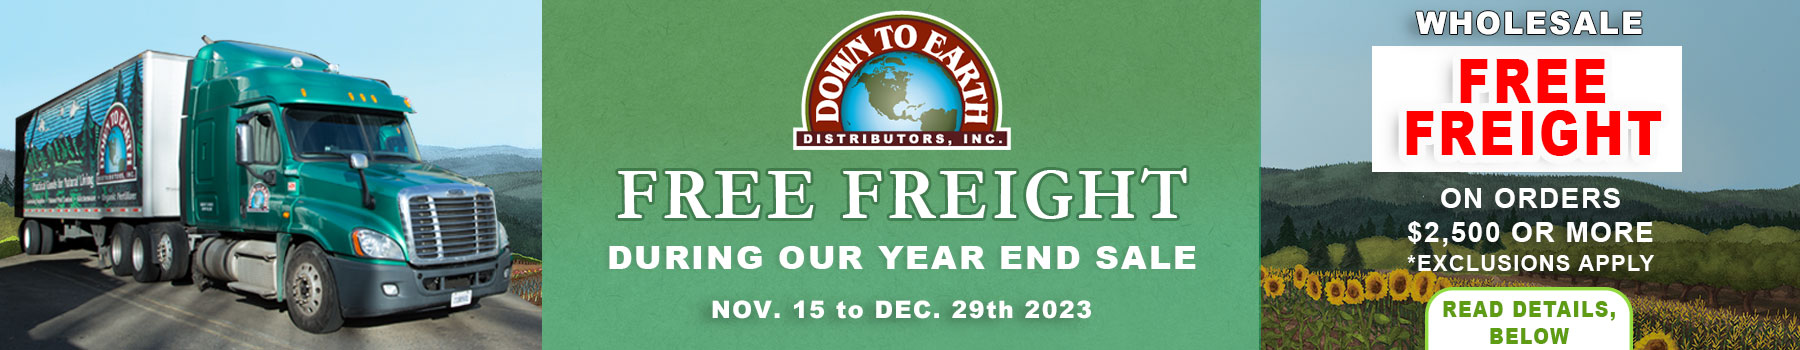 YEAR END SALE - FREE FREIGHT ON ORDERS OVER $2500.00